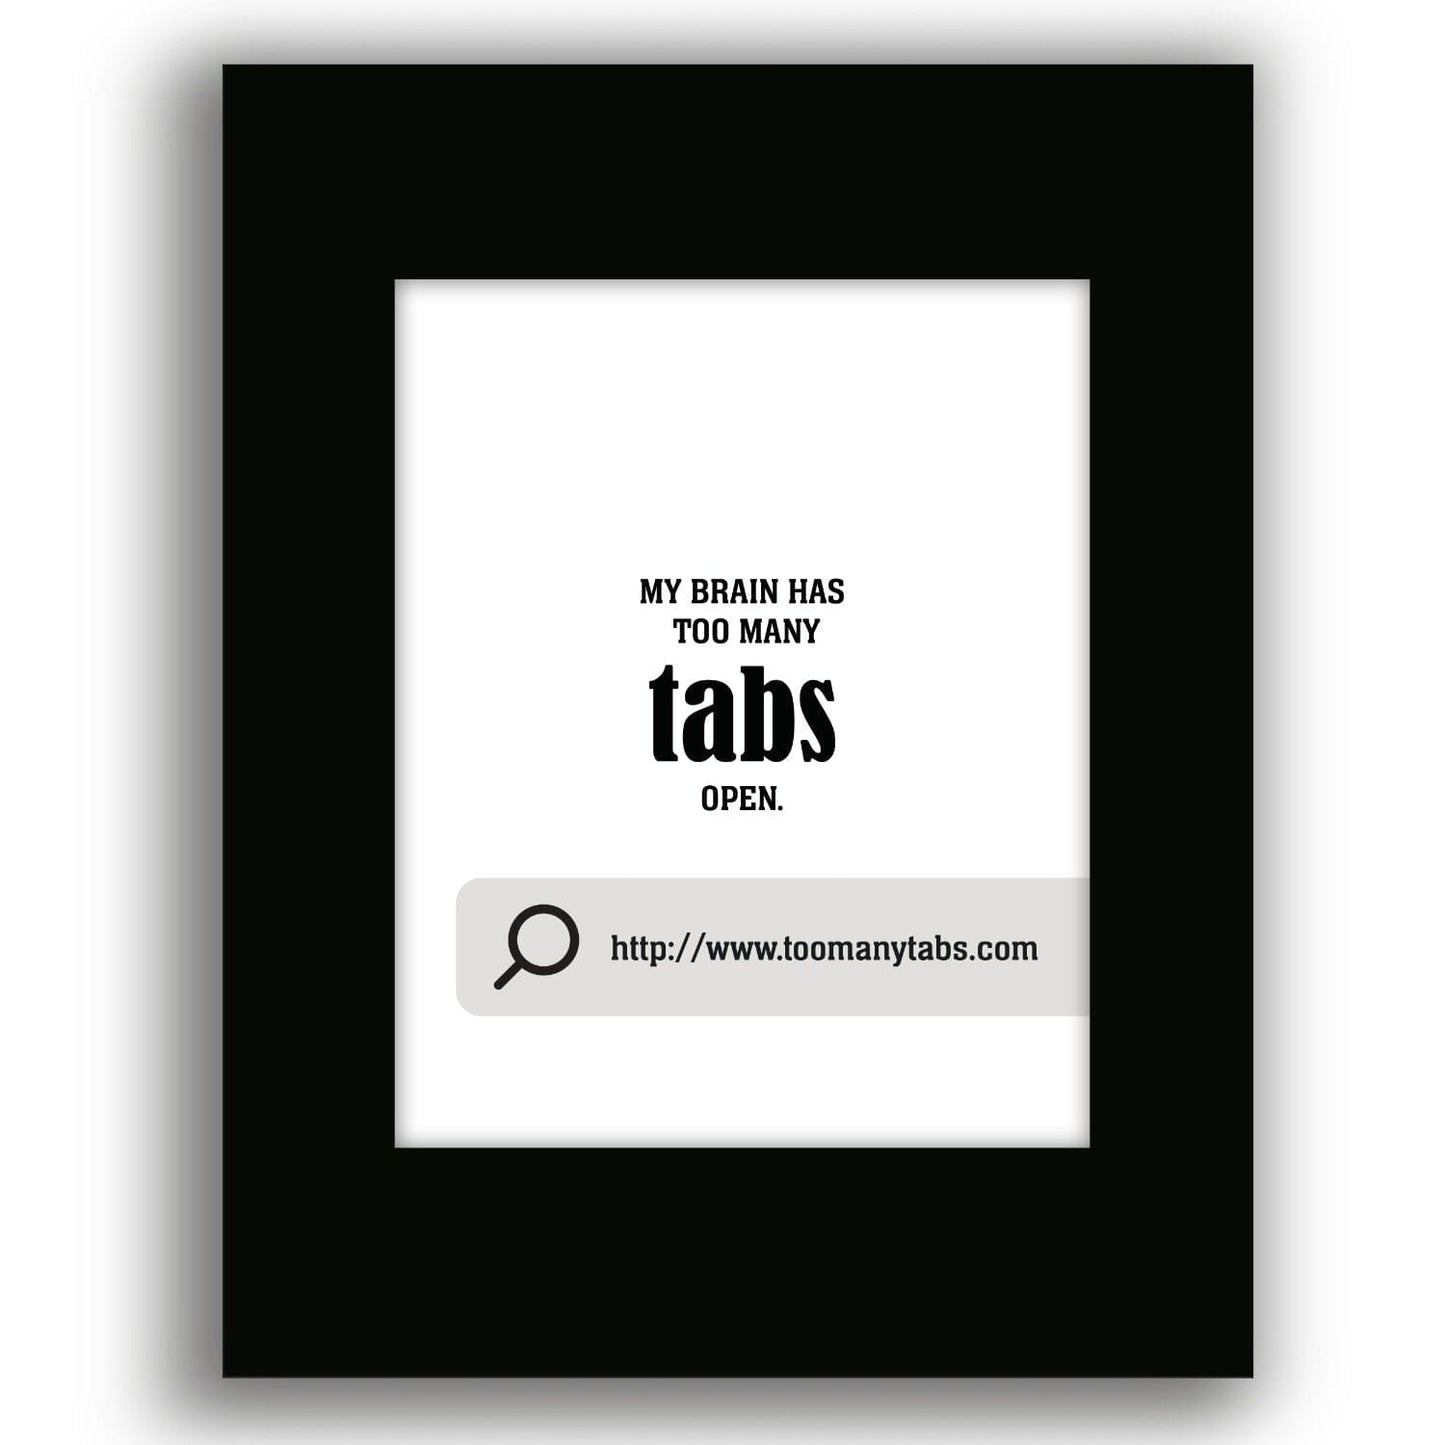 My Brain Has Too Many Tabs Open - Wise and Witty Wall Art Wise and Wiseass Quotes Song Lyrics Art 8x10 Black Matted Print 